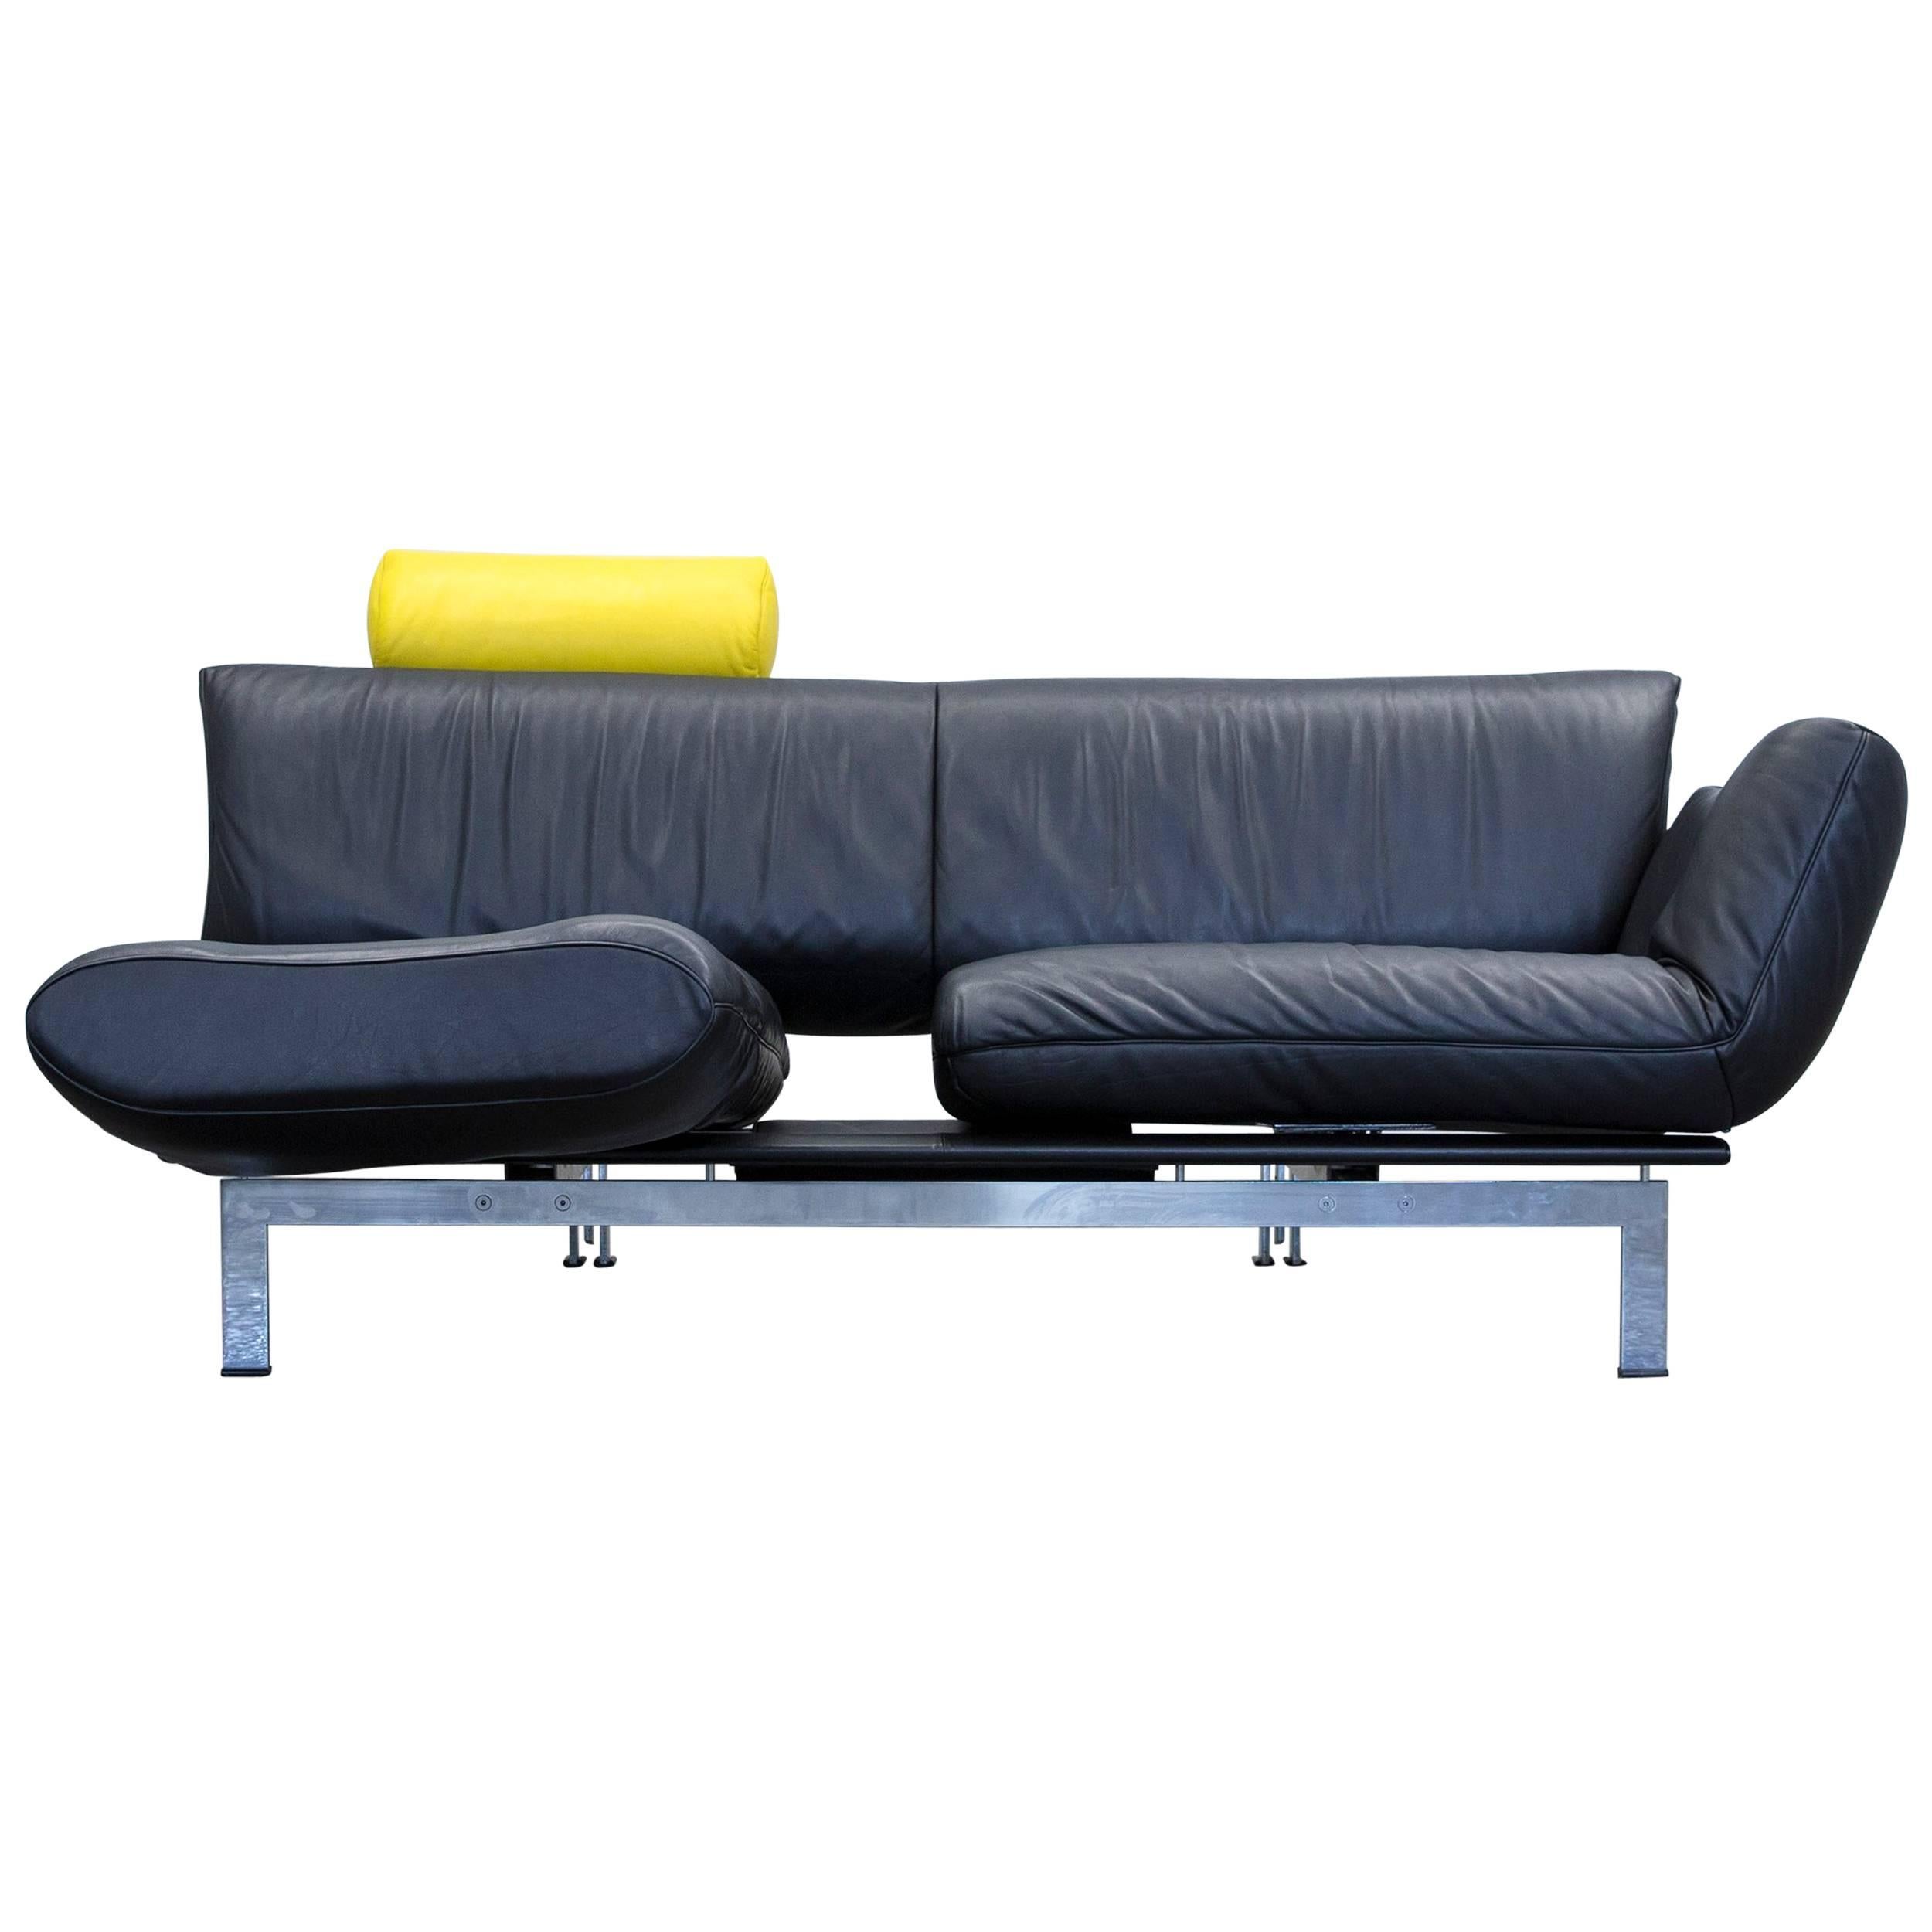 De Sede Ds 140 Designer Sofa Leather Black Yellow Two-Seat Relax Function Couch